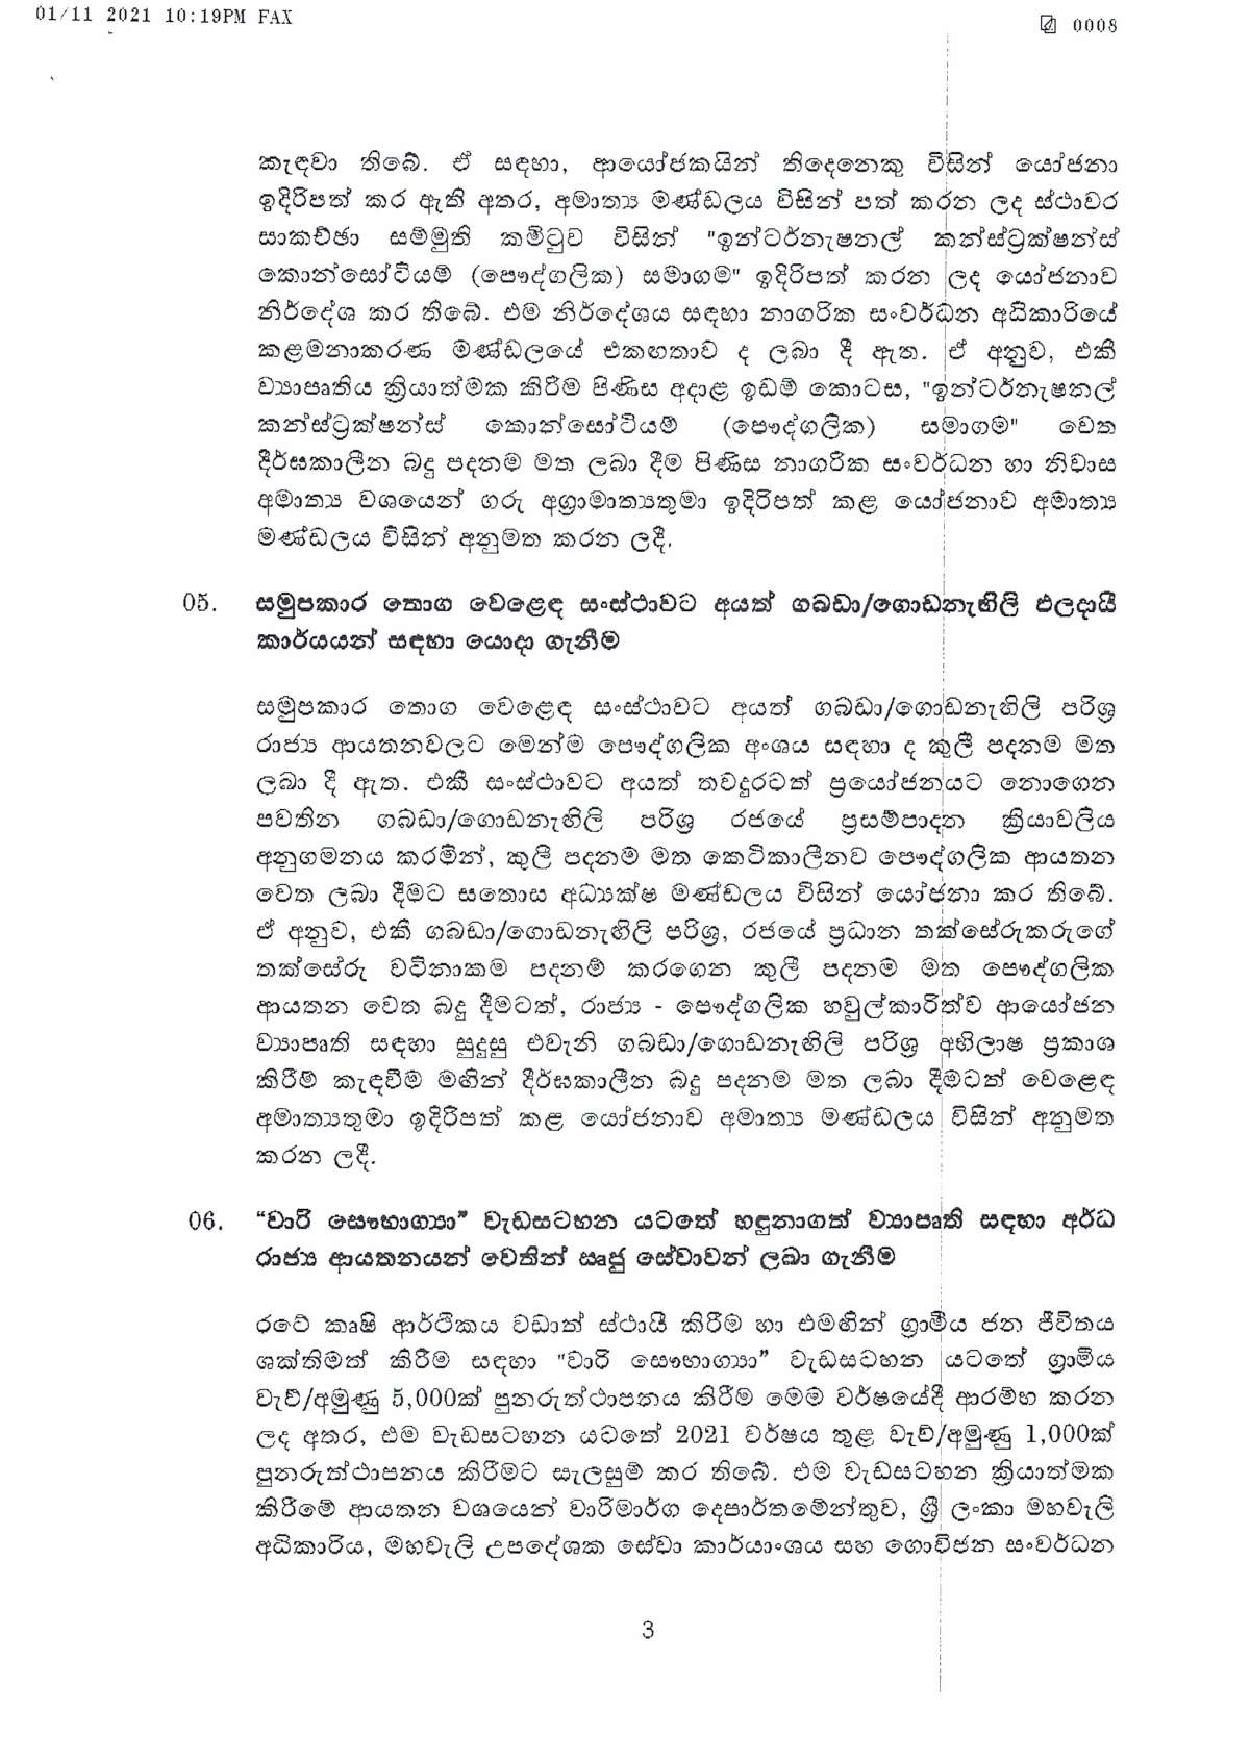 Cabinet Decisions on 01.11.2021 page 003